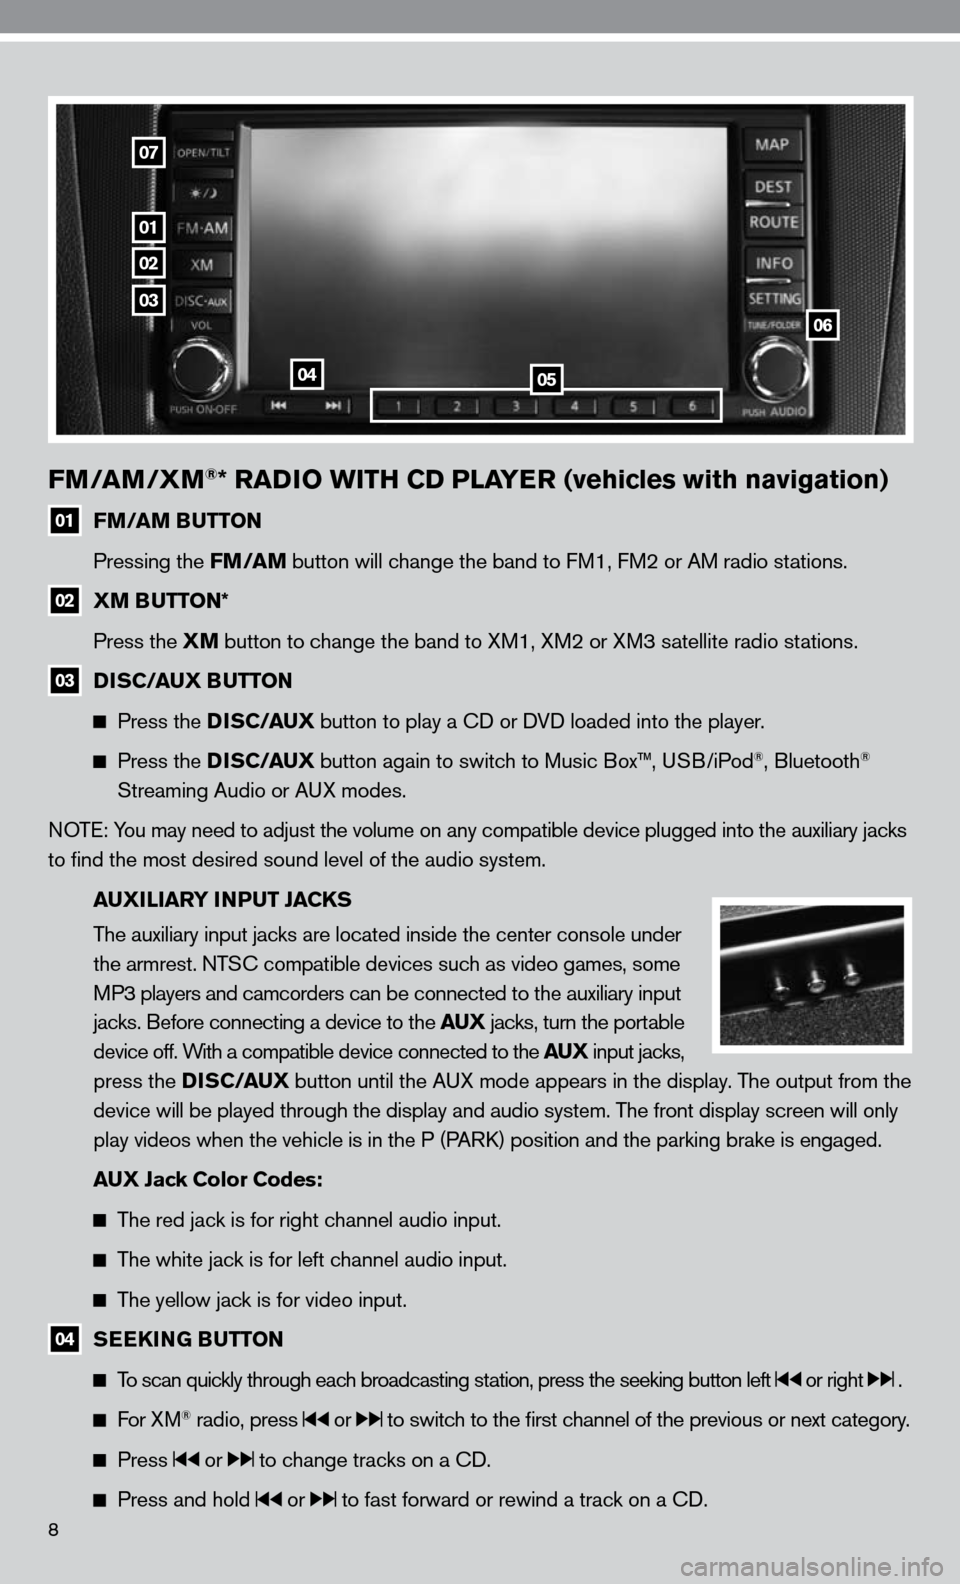 NISSAN ALTIMA COUPE 2010 D32 / 4.G Quick Reference Guide 8
FM/AM/XM®* RADIO WITH CD PLAYER (vehicles with navigation)
01 FM/AM BUTTON
    Pressing the FM/AM button will change the band to  fM1,  fM2 or AM radio stations.  
02  XM BUTTON* 
    Press the XM 